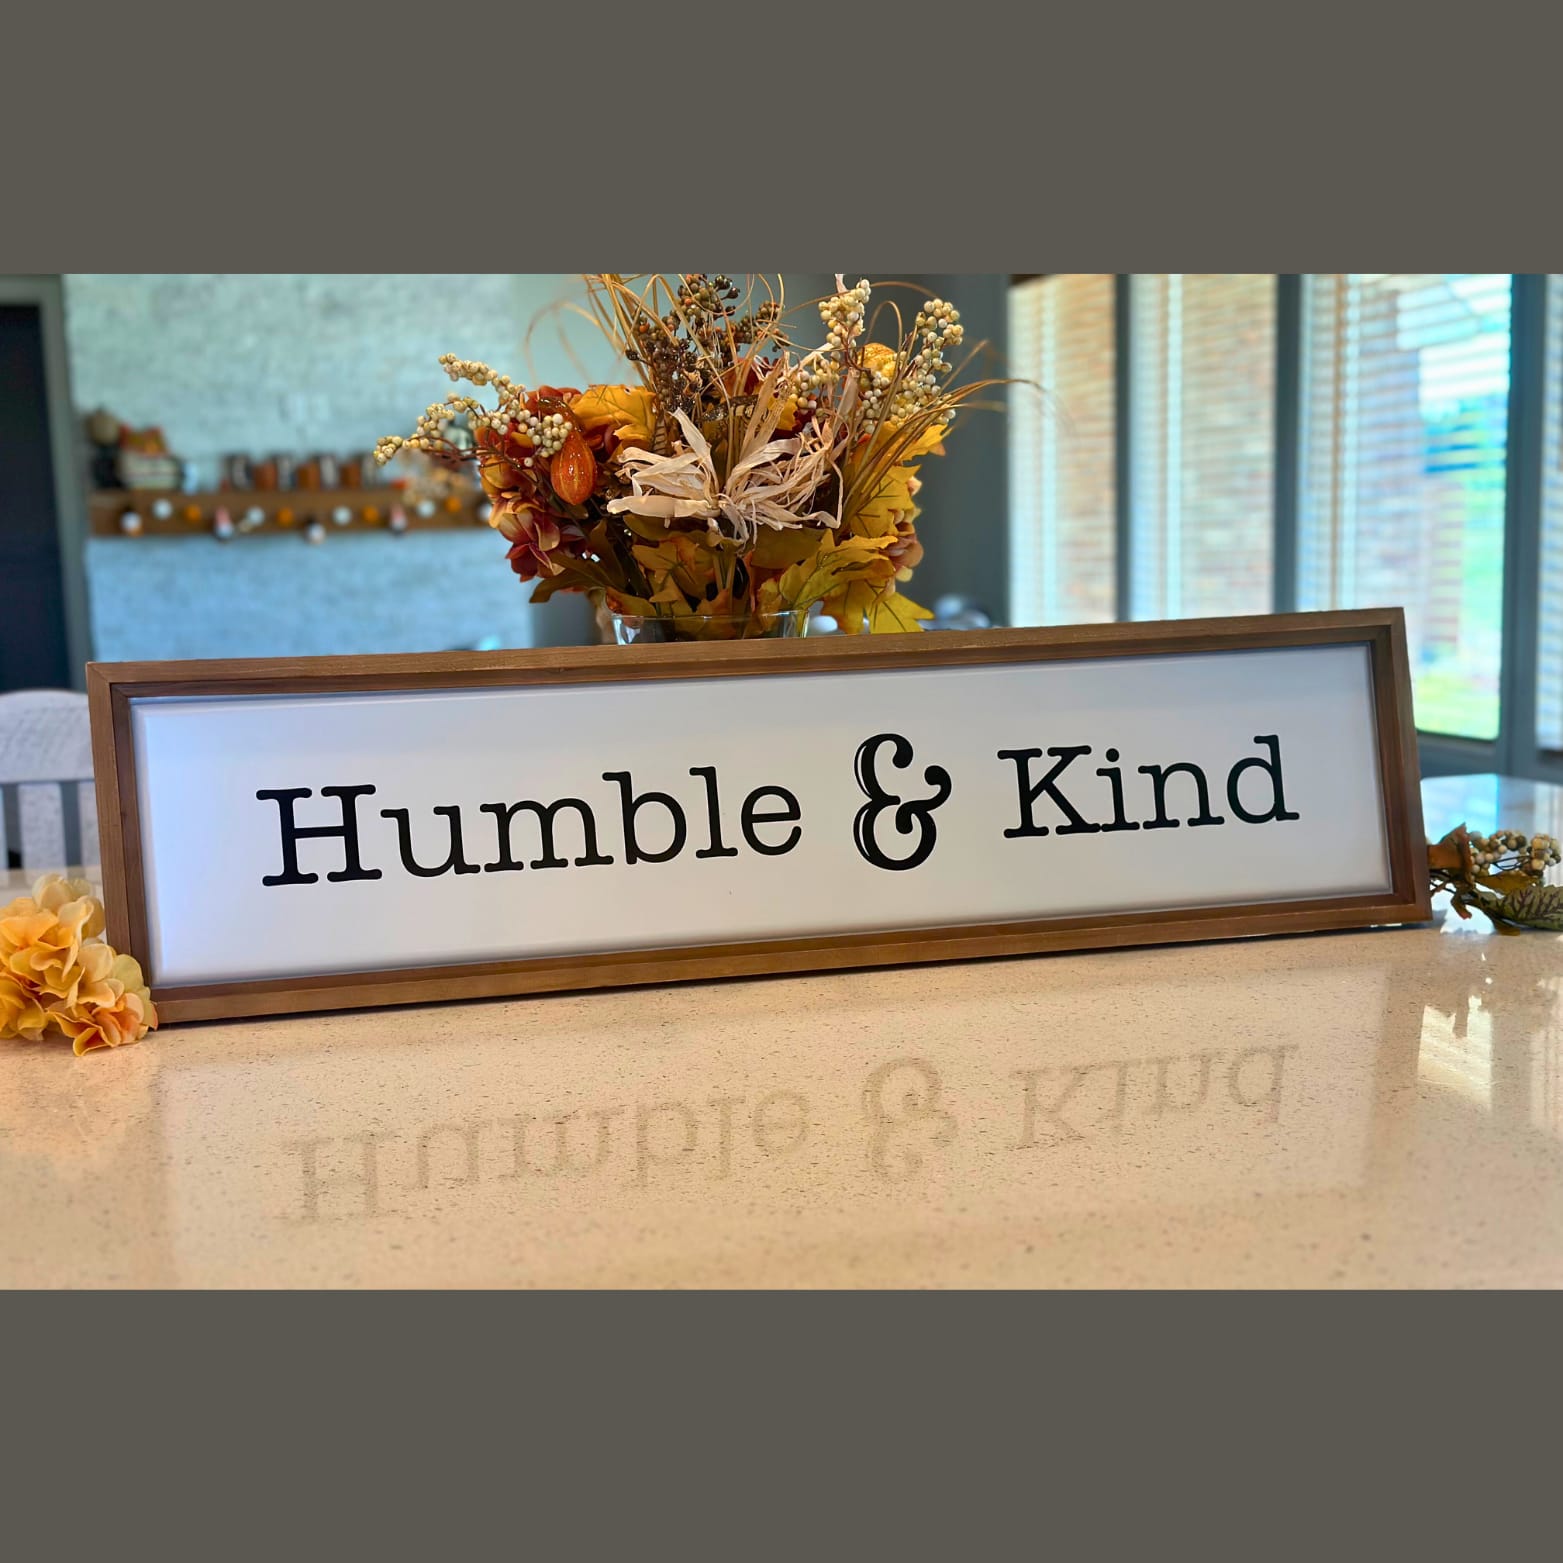 Humble &amp; Kind - &quot;Humble &amp; Kind&quot; sign. Perfect gift and home decoration. White with black lettering and wood frame. Measures 10 inches tall by 39.5 wide.